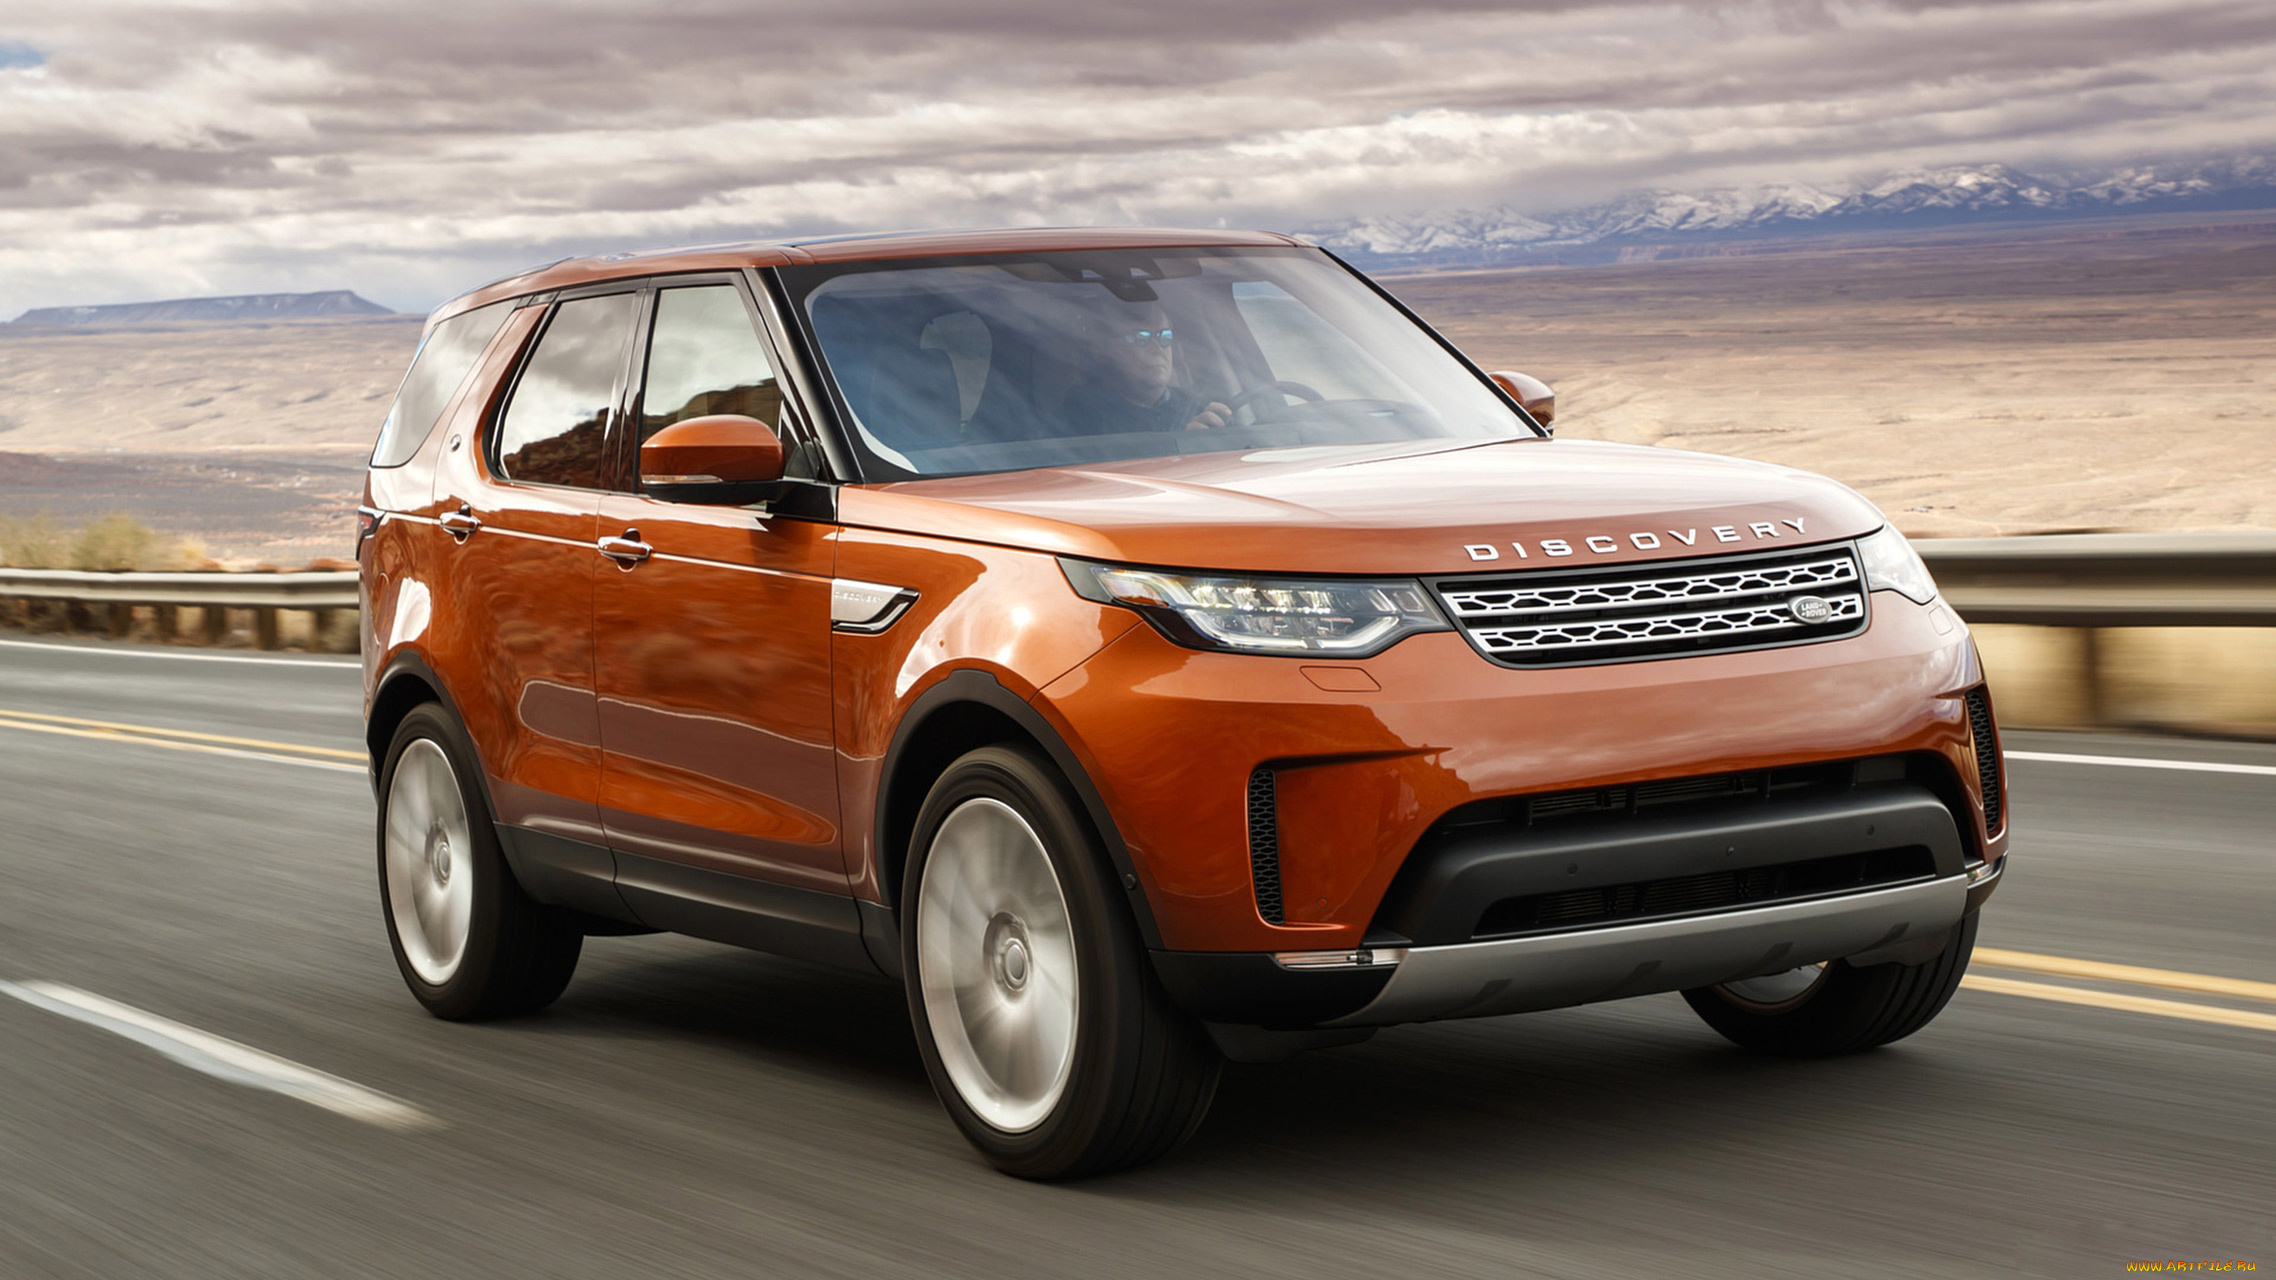 land-rover, discovery, hse-td6, 2018, автомобили, land-rover, внедорожник, 2018, hse-td6, discovery